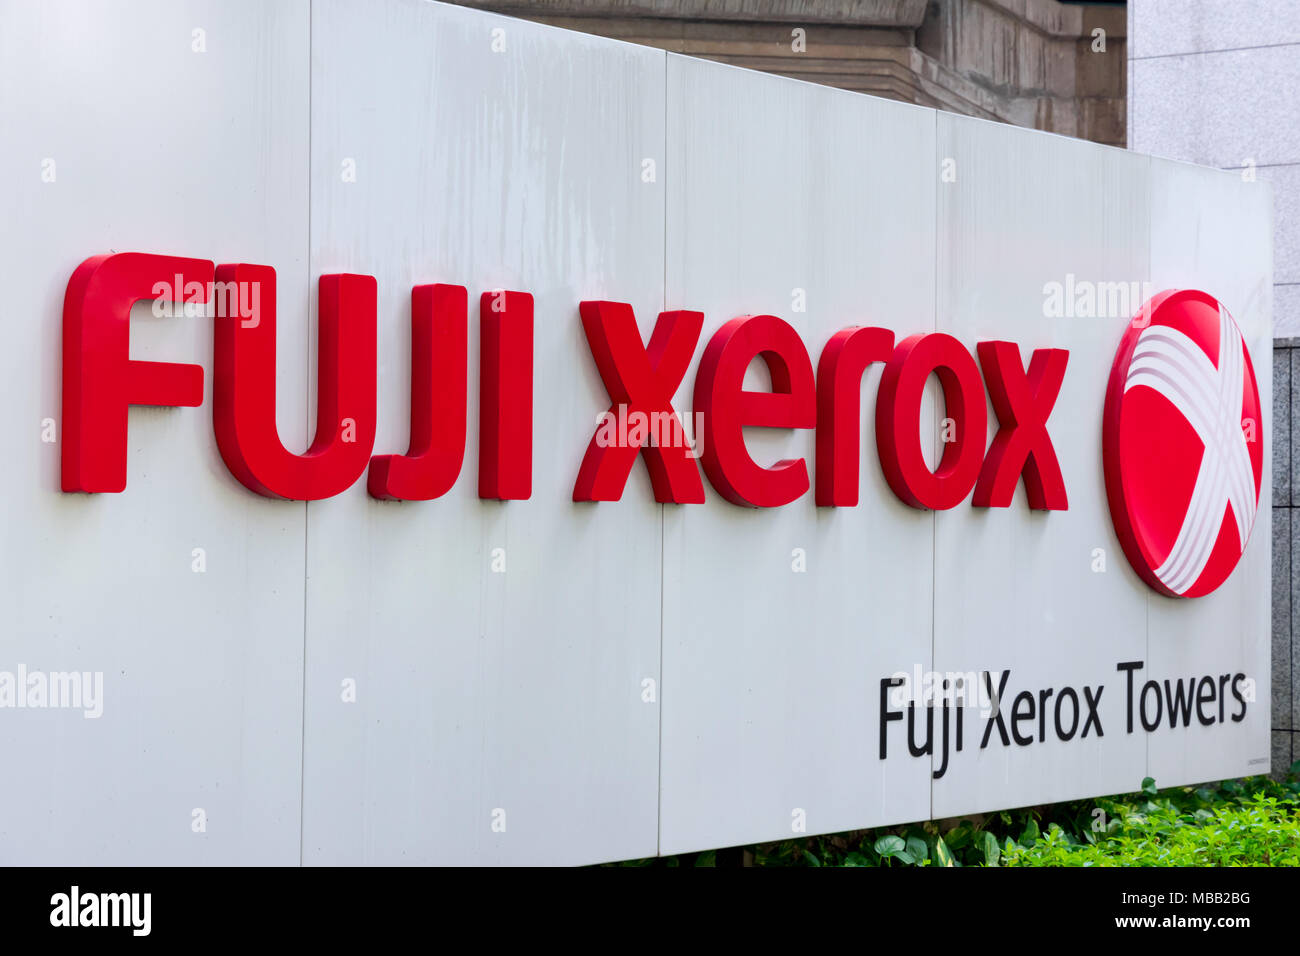 SINGAPORE - DECEMBER 23, 2017: Fuji Xerox Towers signage at Singapore business district. Stock Photo